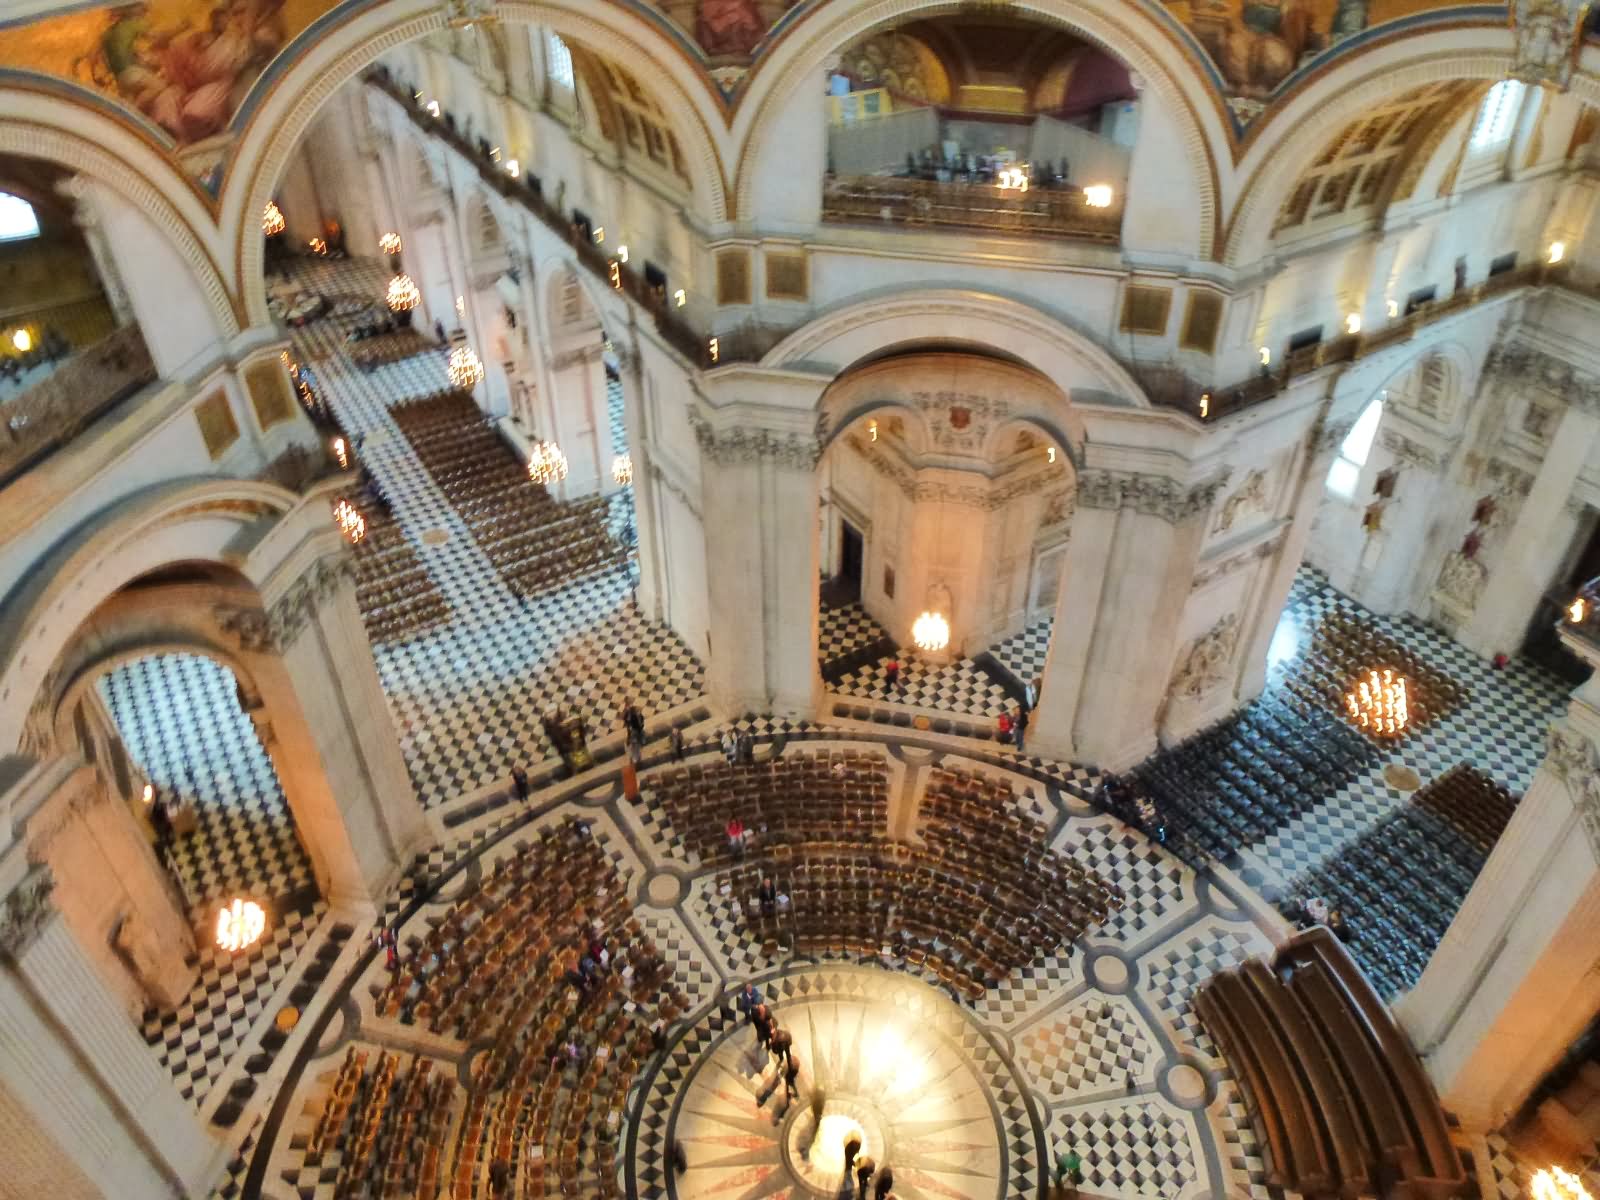 Amazing Interior View Of The St Paul’s Cathedral